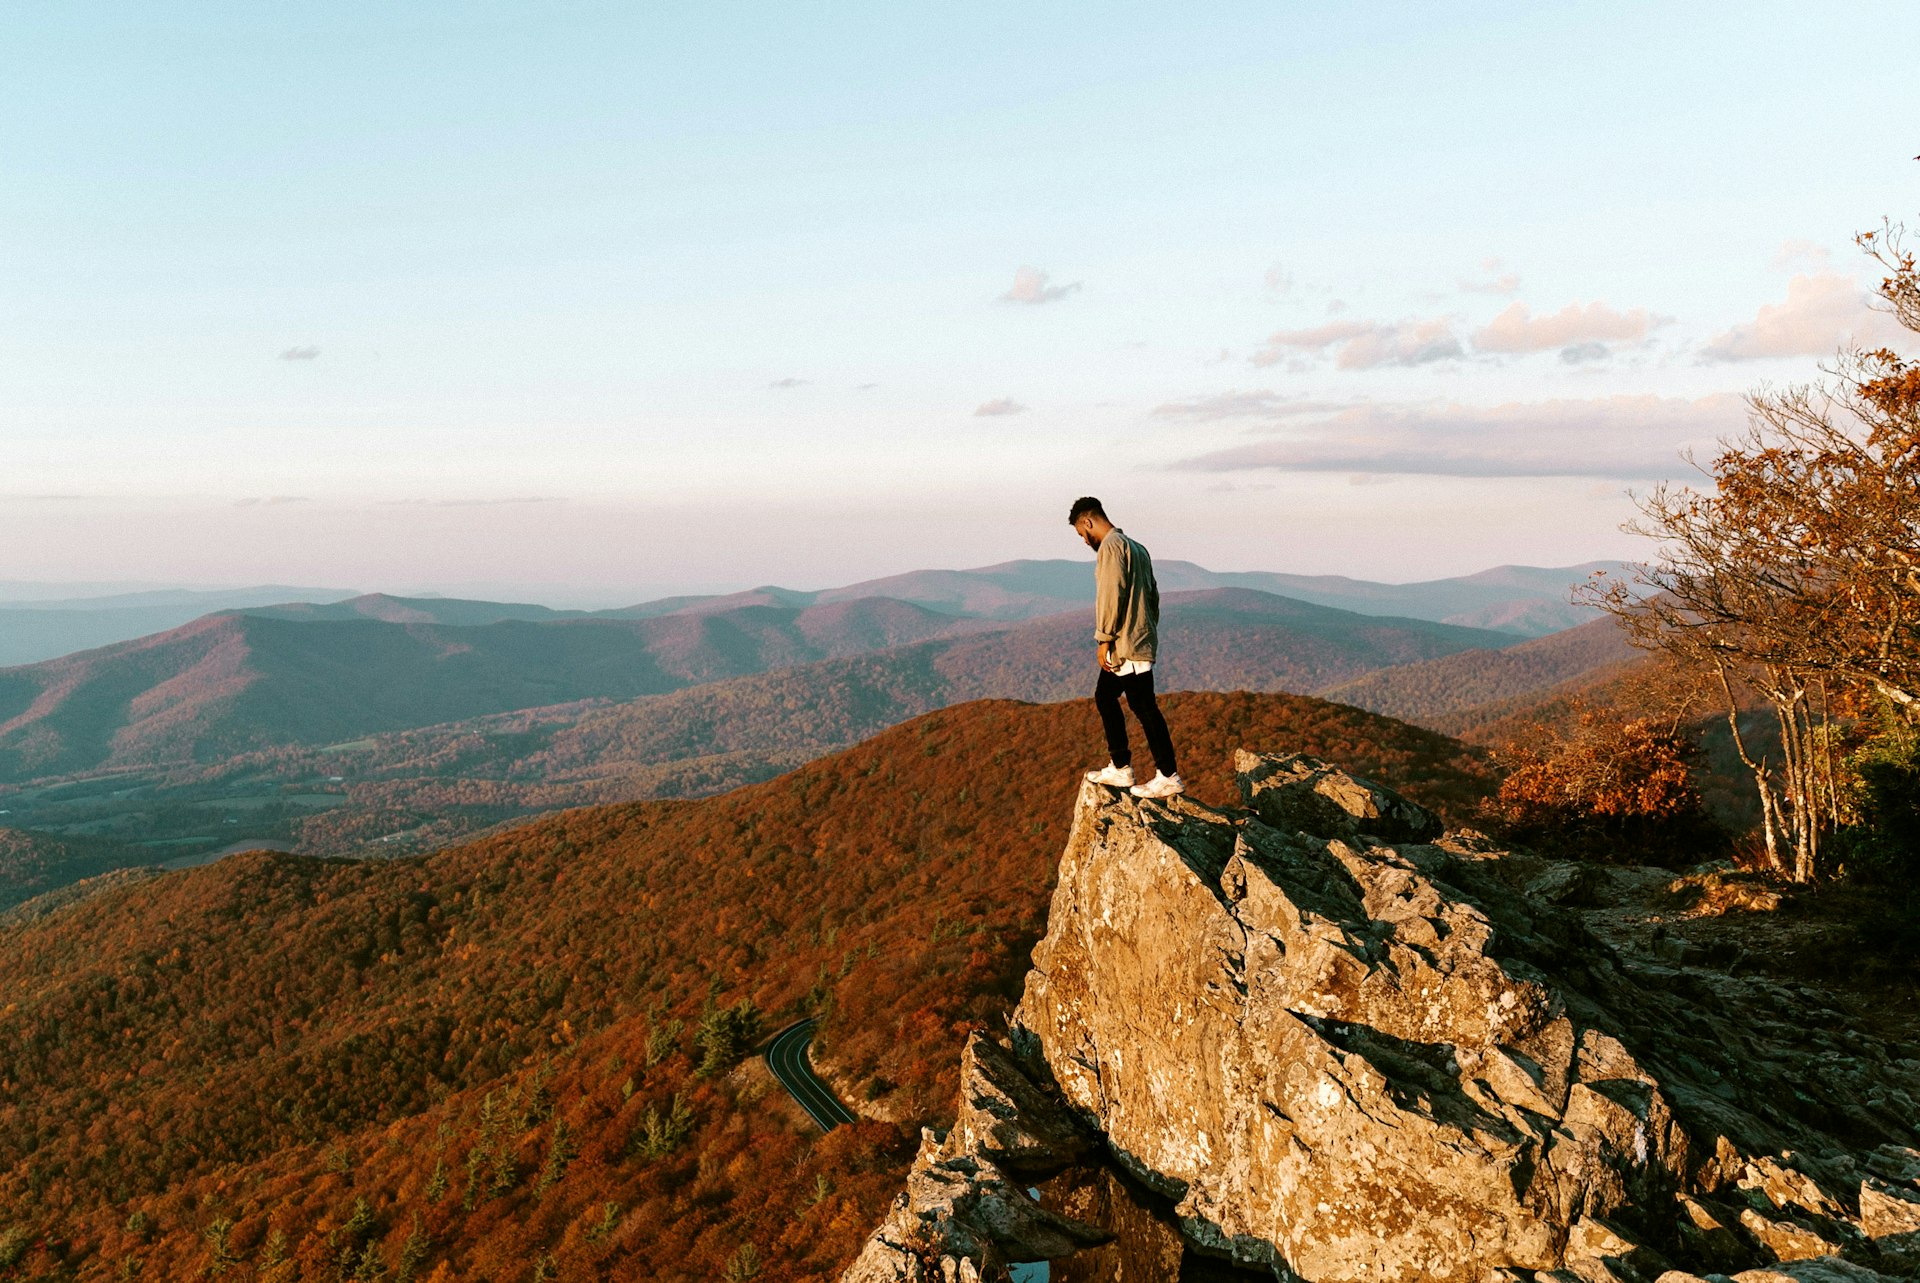 Man stood on the edge of a large rock overlooking the scenic Shenandoah National Park in fall colours